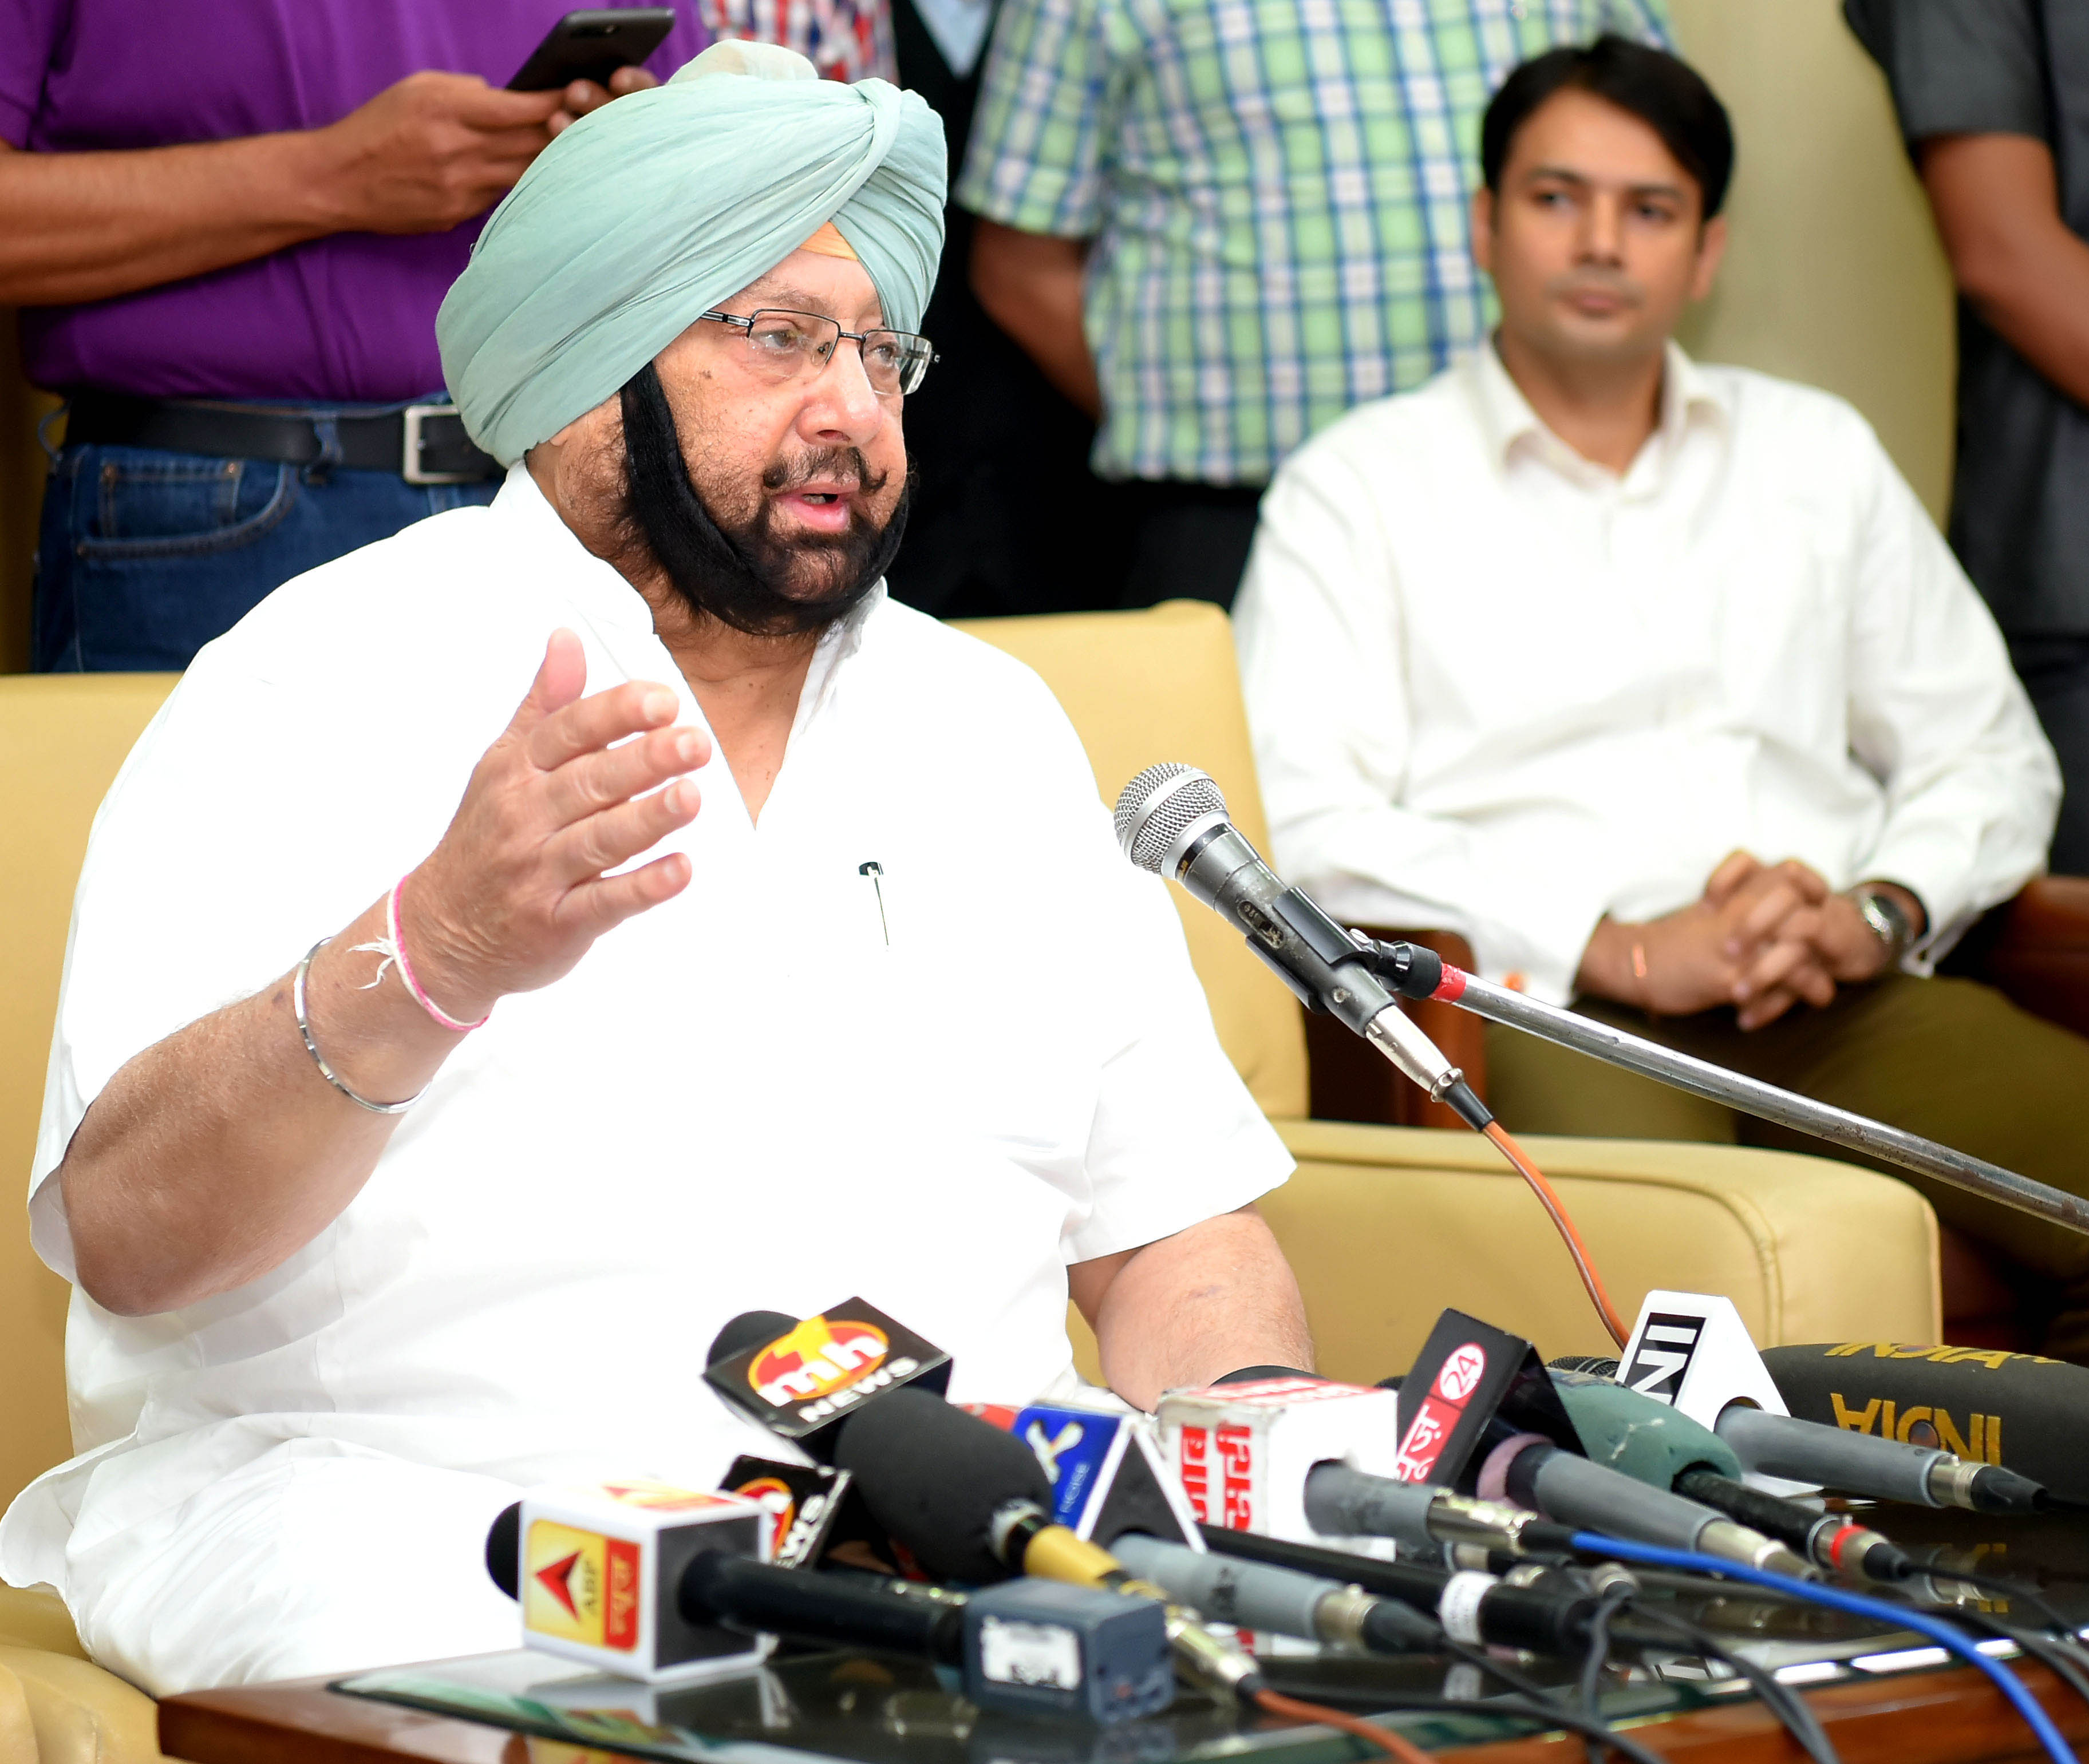 STF on drugs will move full steam in war against drugs once Harpreet Sidhu takes charge: CM